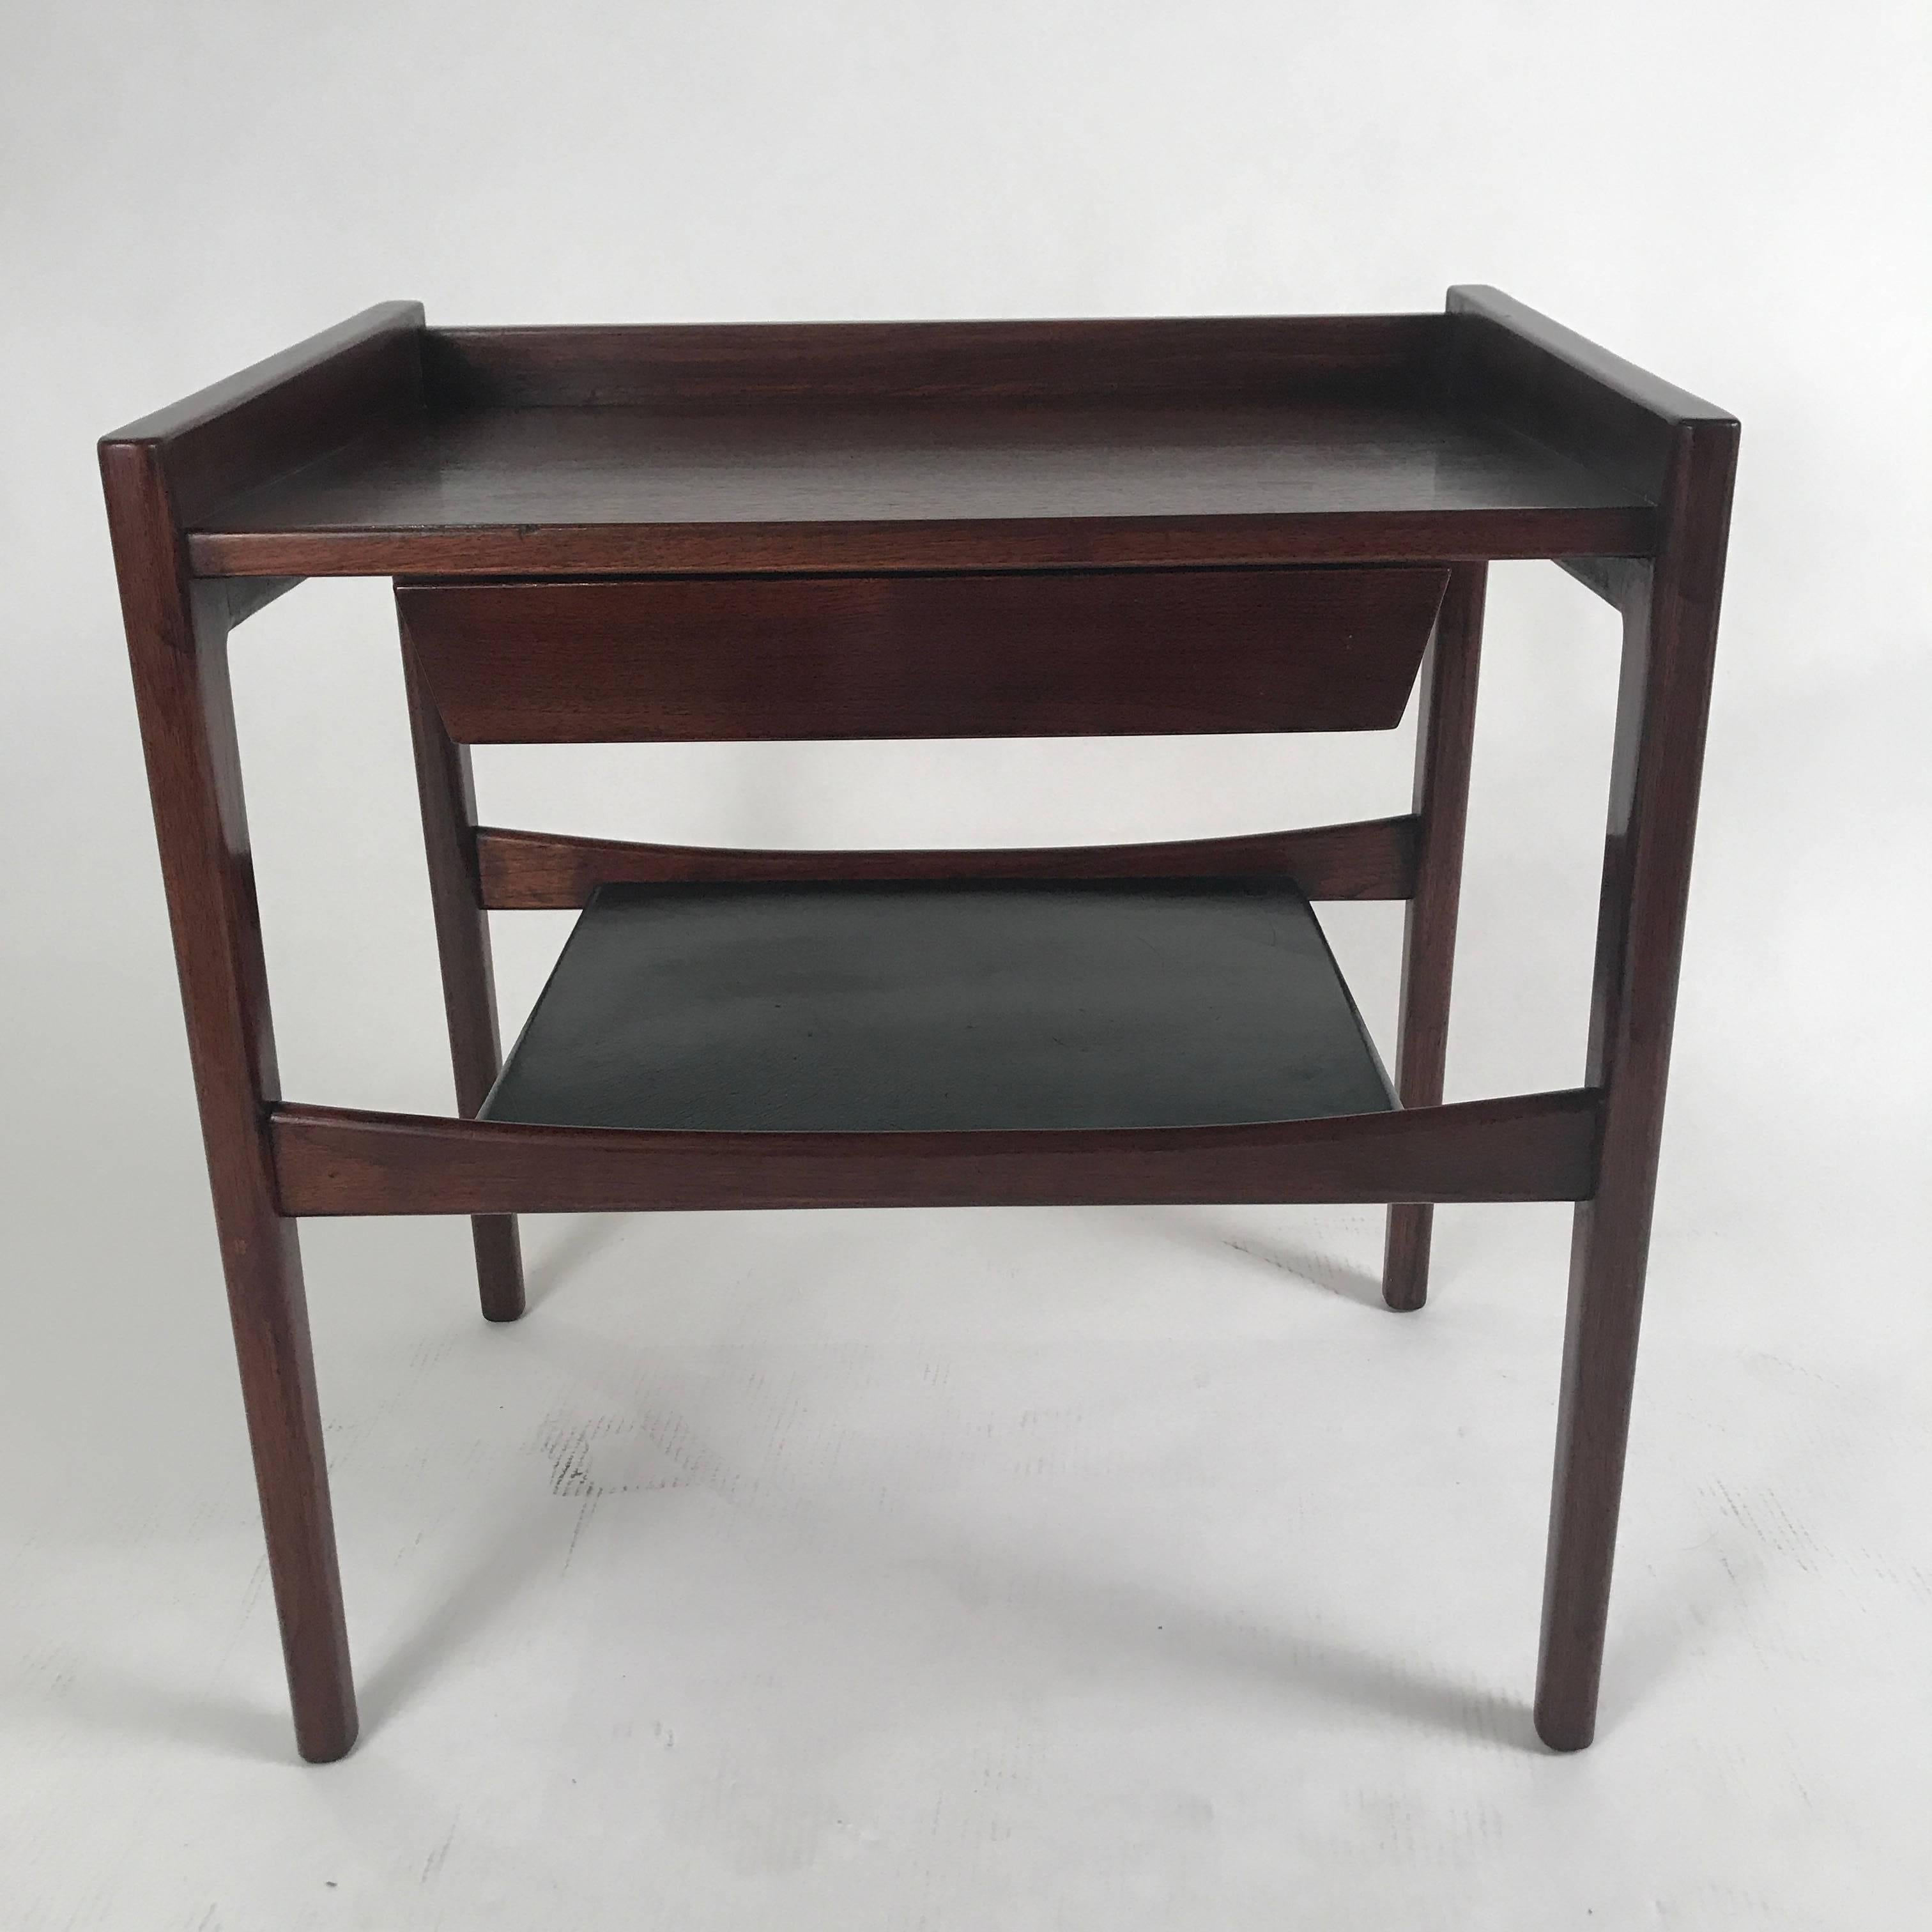 Mid-Century Modern Pair of Stilted Jens Risom End / Lamp Tables /Nightstands in Walnut and Leather